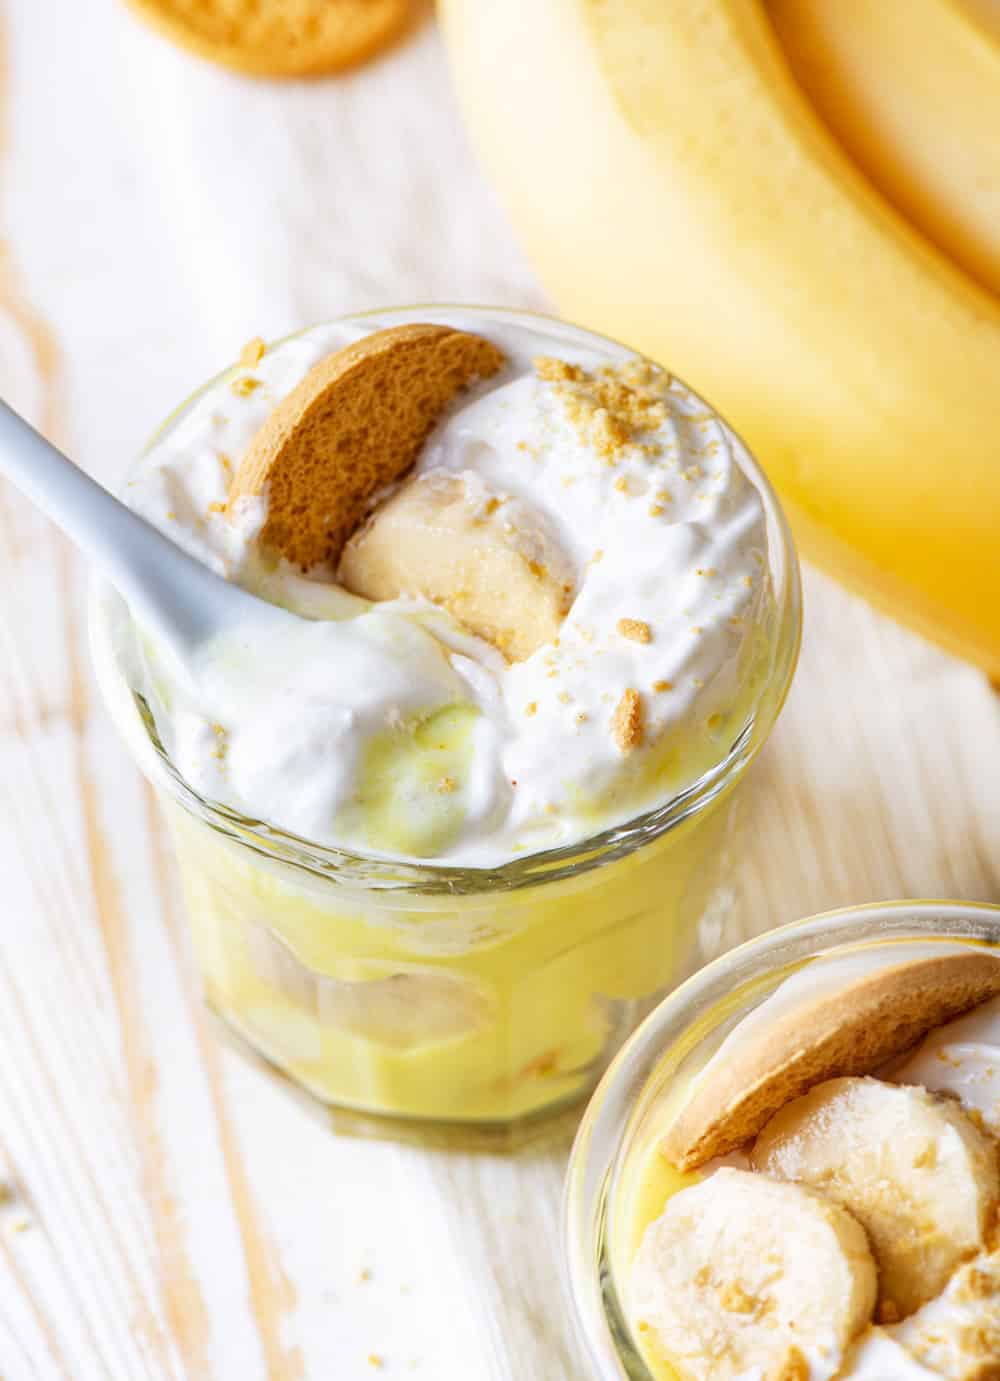 A glass cup filled with vegan banana pudding with vegan whipped cream on top with one slice of a banana and a vanilla cookie in it. There is a white plastic spoon submerged in the top of the whipped cream. Another glass is in front of the other one with only the top visible. The top has a few slices of banana and a vanilla cookie on top of vegan whipped cream. Everything is on a wooden table.